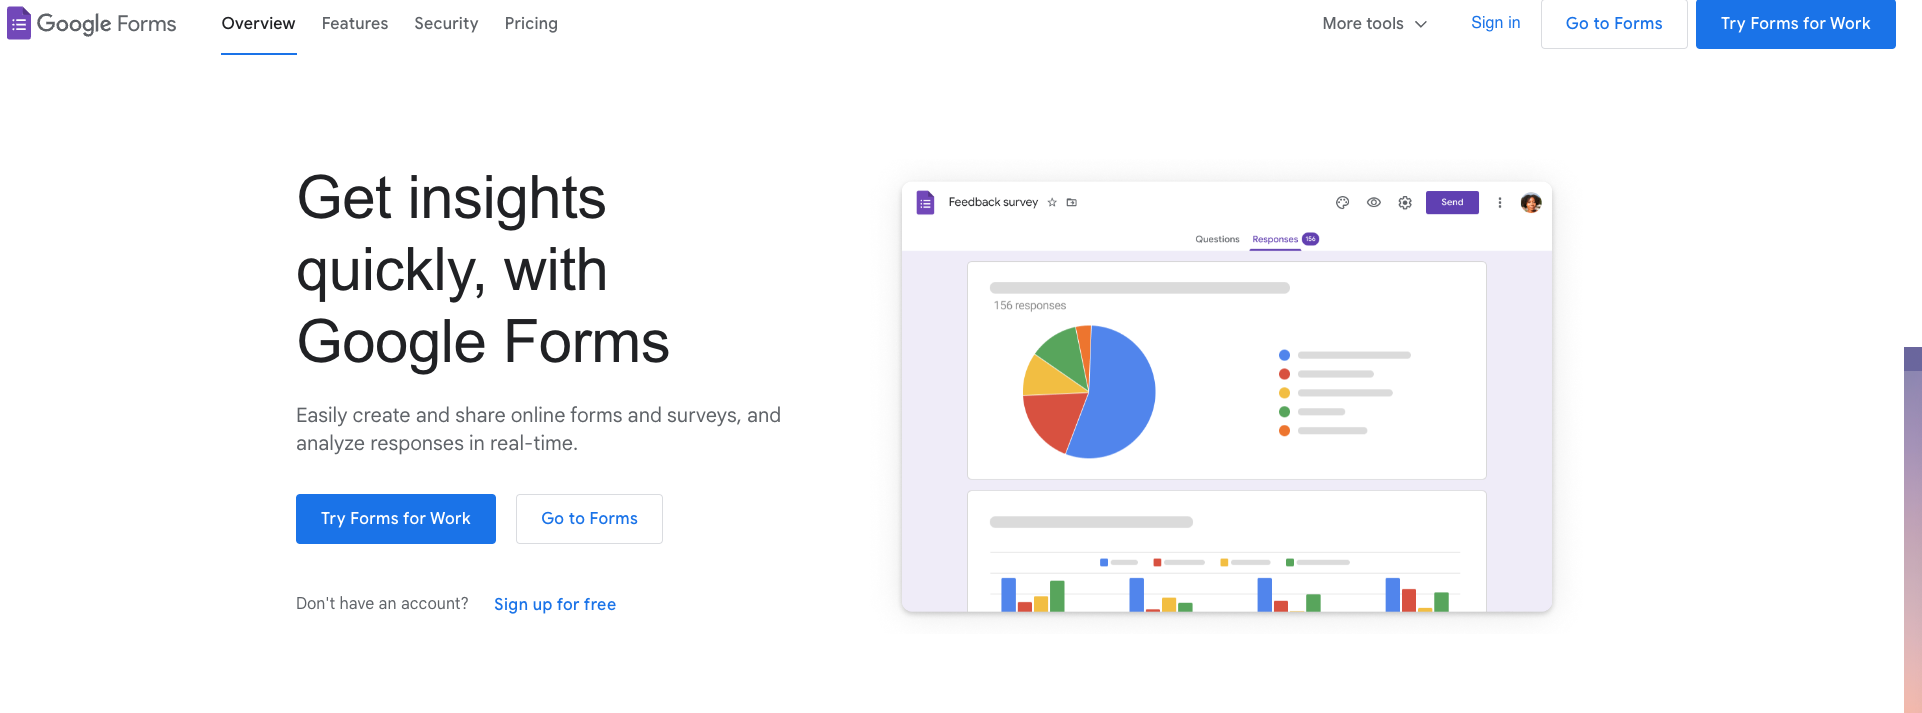 Google Forms is often considered one of the best alternatives to SurveyMonkey due to its simplicity, versatility, accessibility, integration capabilities, and cost-effectiveness. 